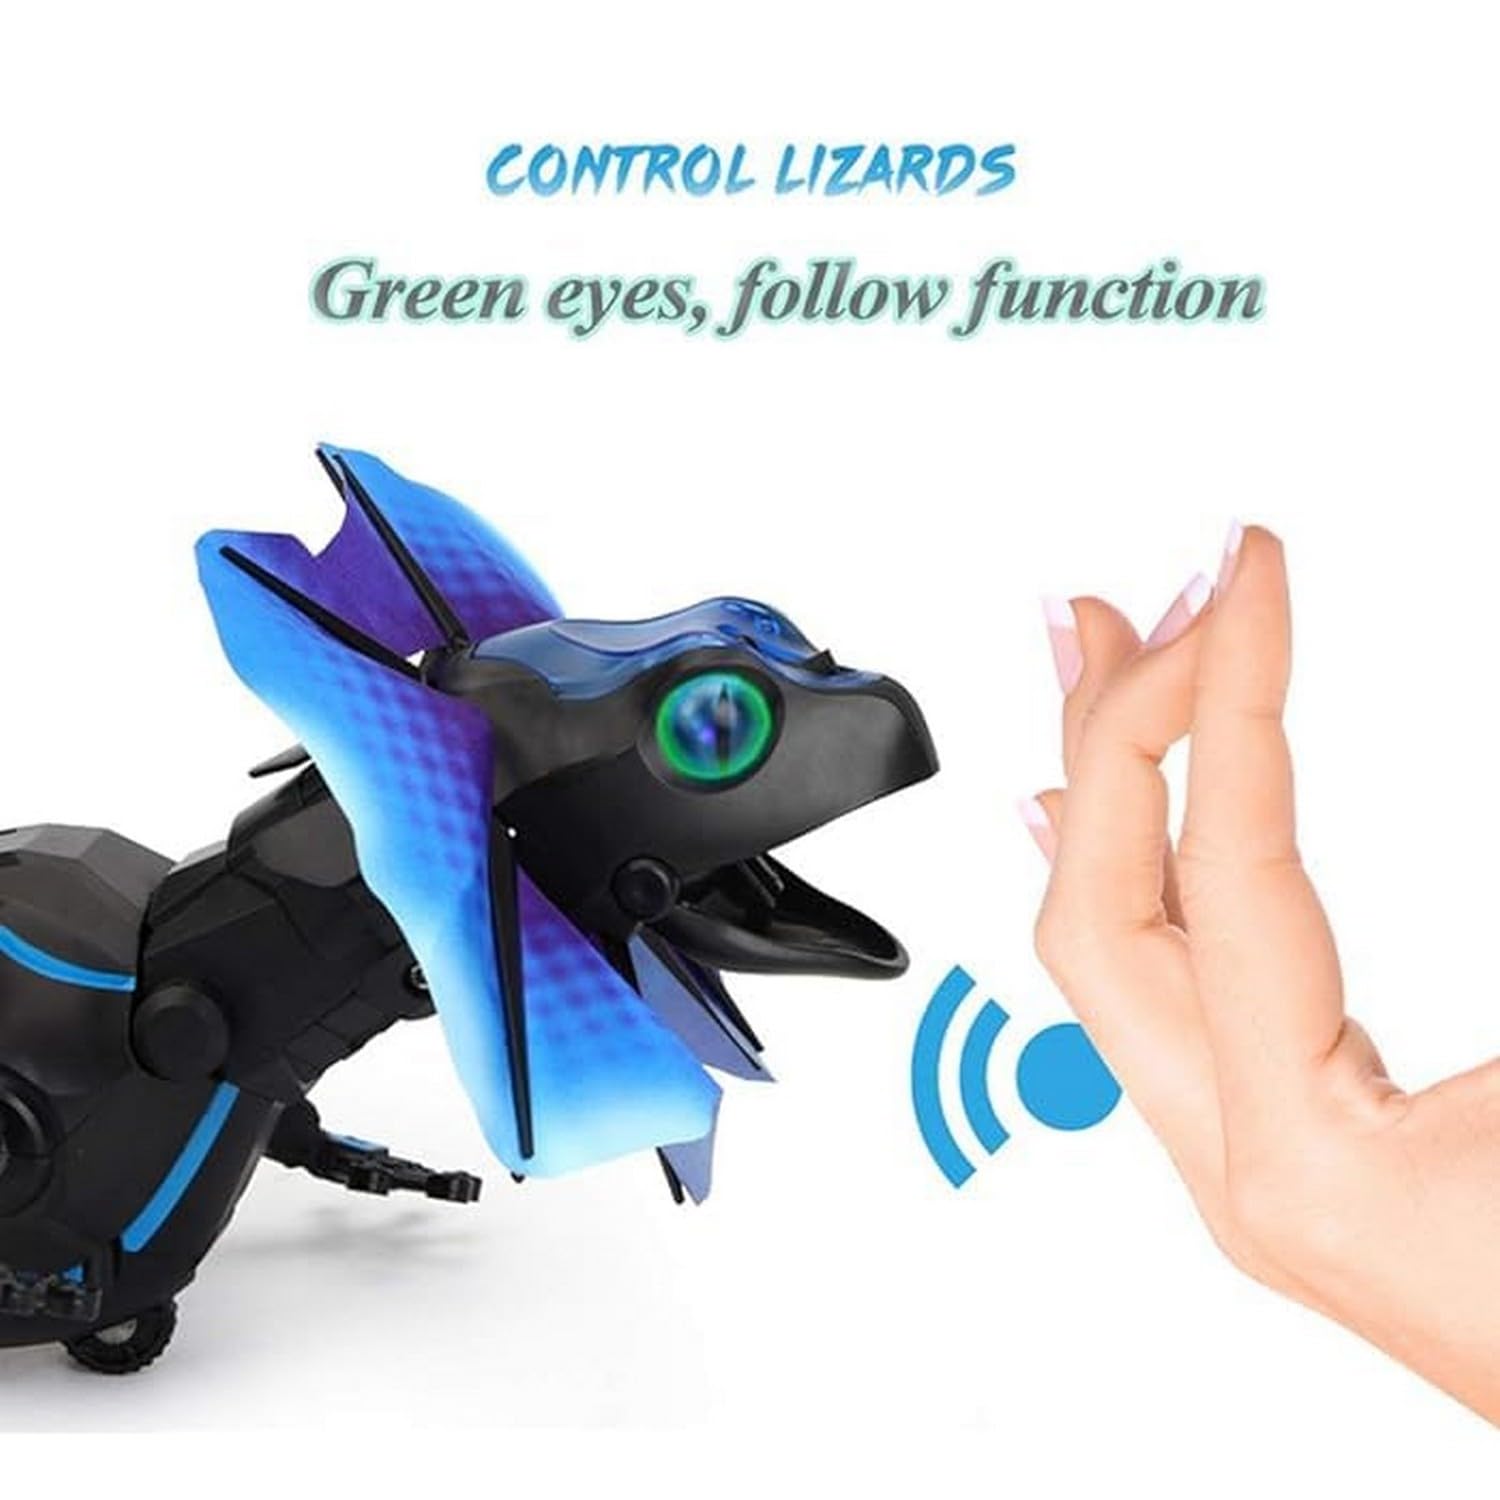 Infrared Remote Control Lizardbot 4 Modes RC Lizard Kids Toy Fake Lizard Fun Prank Toys for Kids and Adults Look House Practical Jokes and Trick Toys (Multi Color)